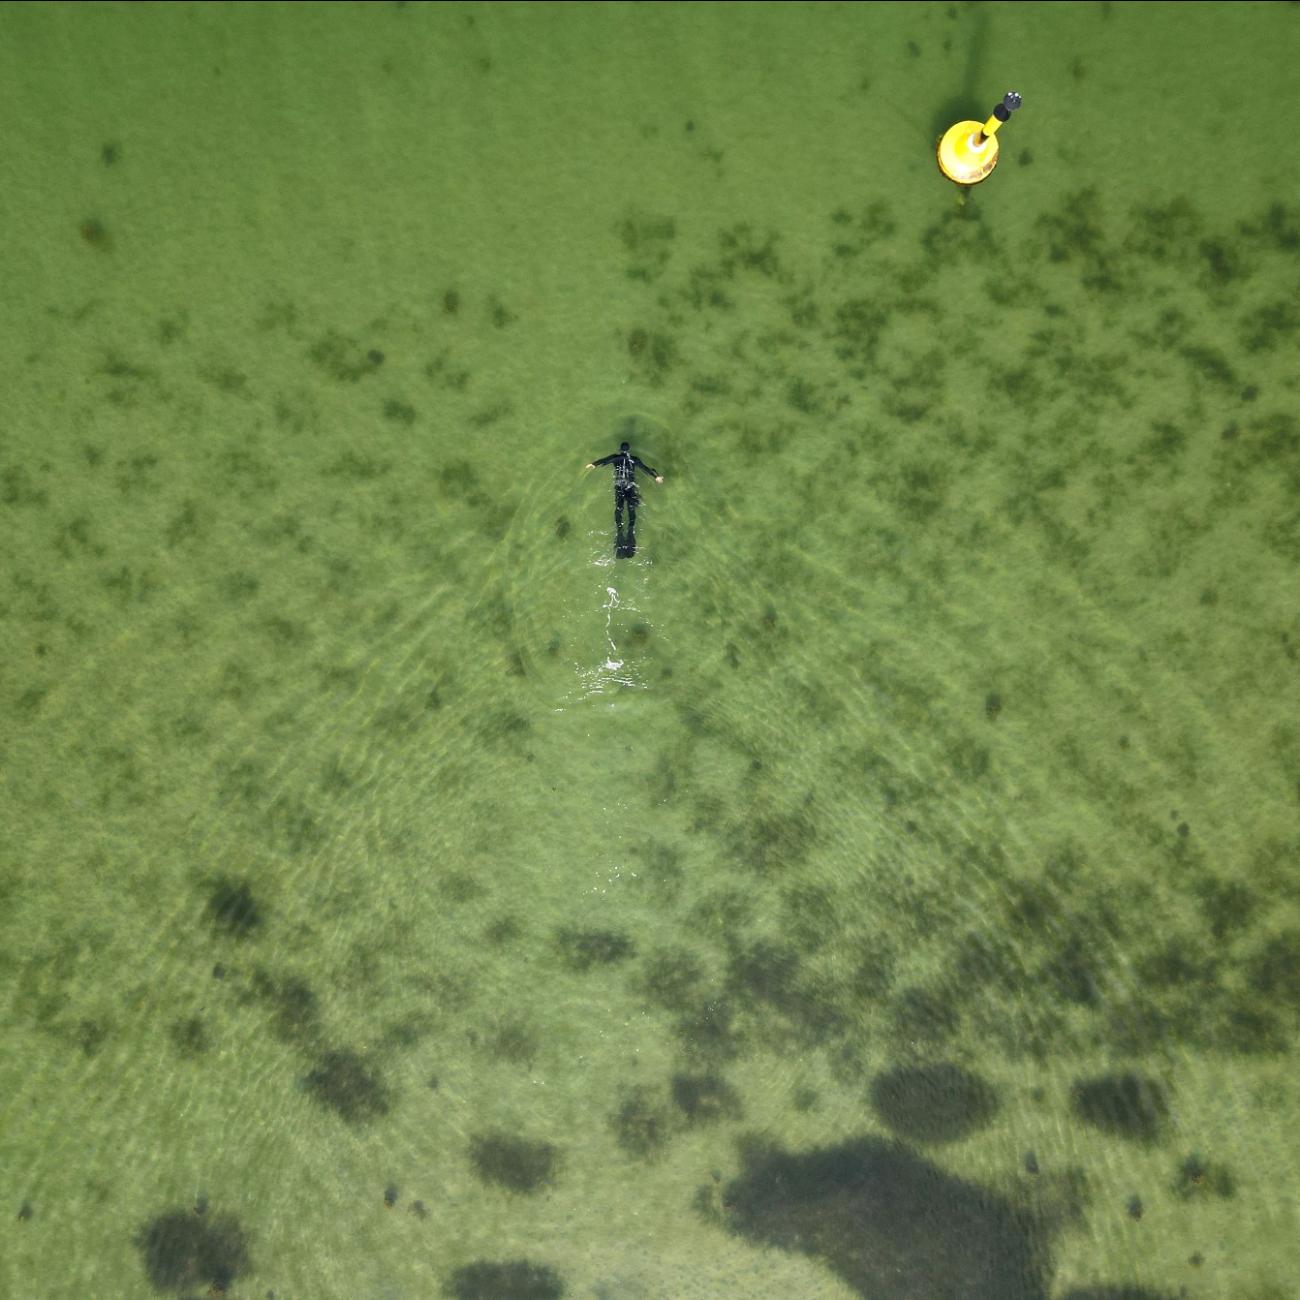 Tadhg O'Corcora, 38, a marine scientist for GEOMAR, snorkels above a hand-planted seagrass meadow in a checkerboard pattern in Gelting, Northern Germany, June 20, 2023.